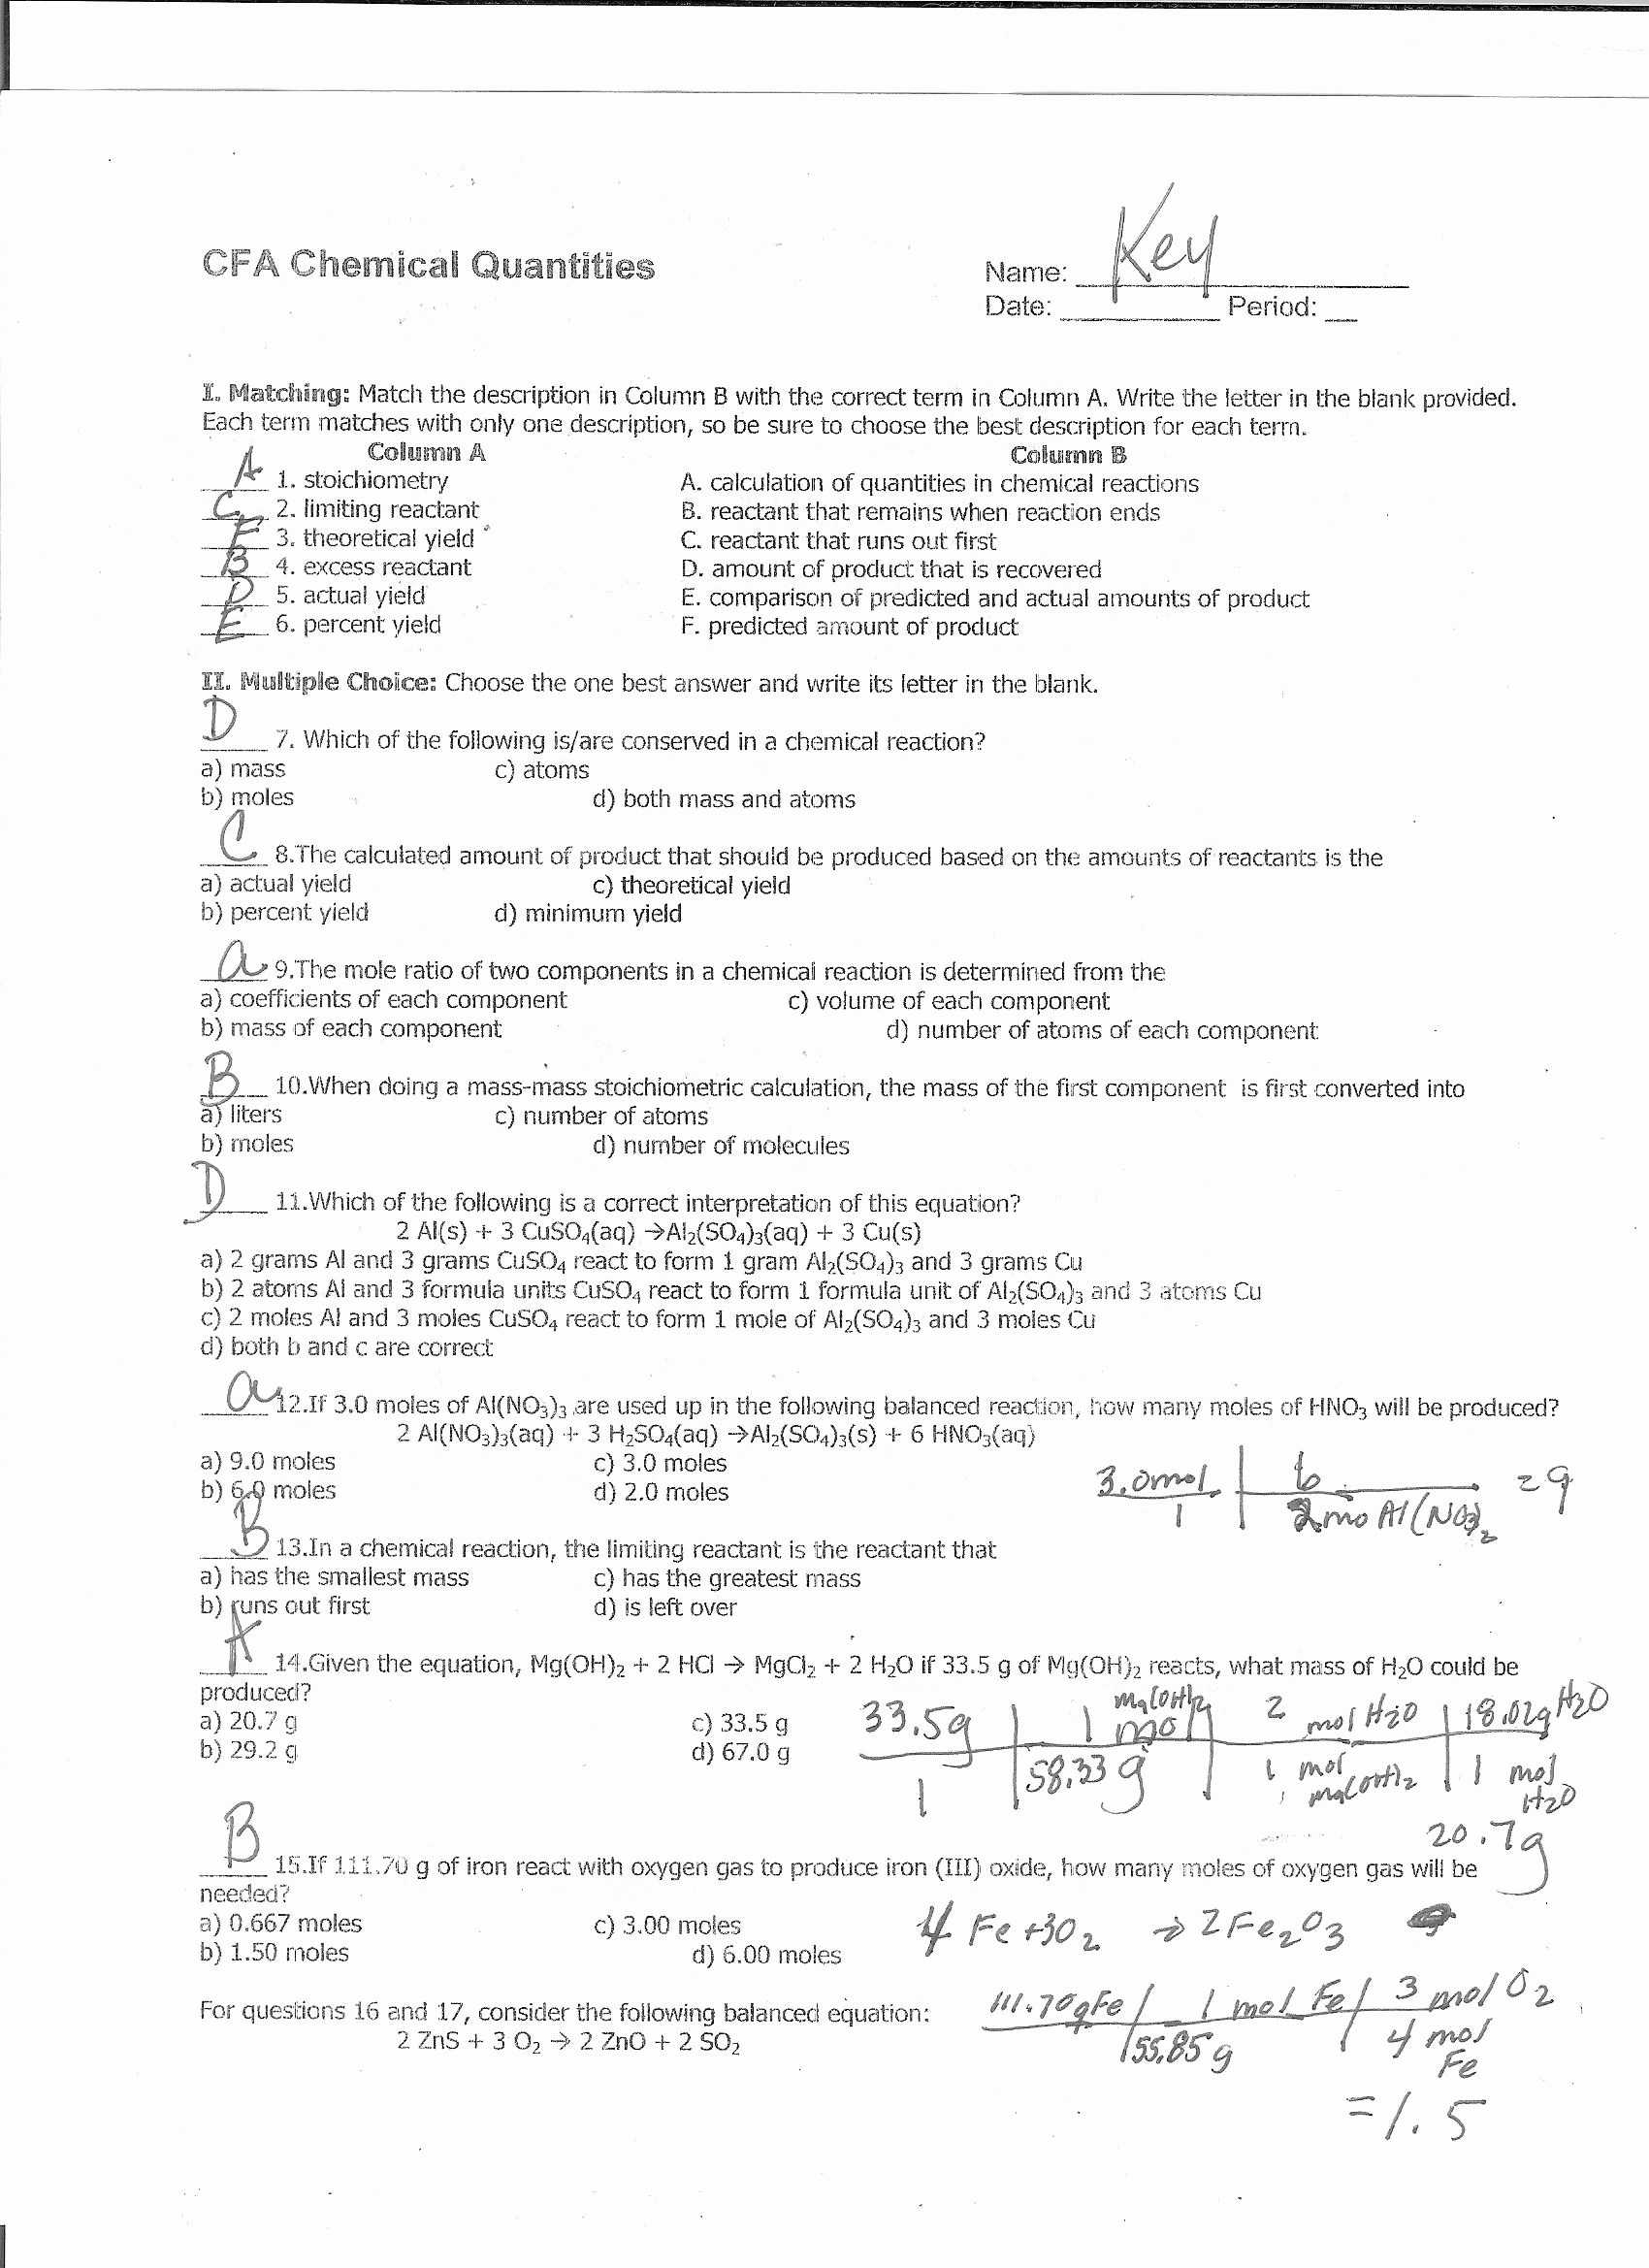 Limiting Reagent Worksheet Along with theoretical and Percent Yield Worksheet Answers & ""sc" 1"st" "